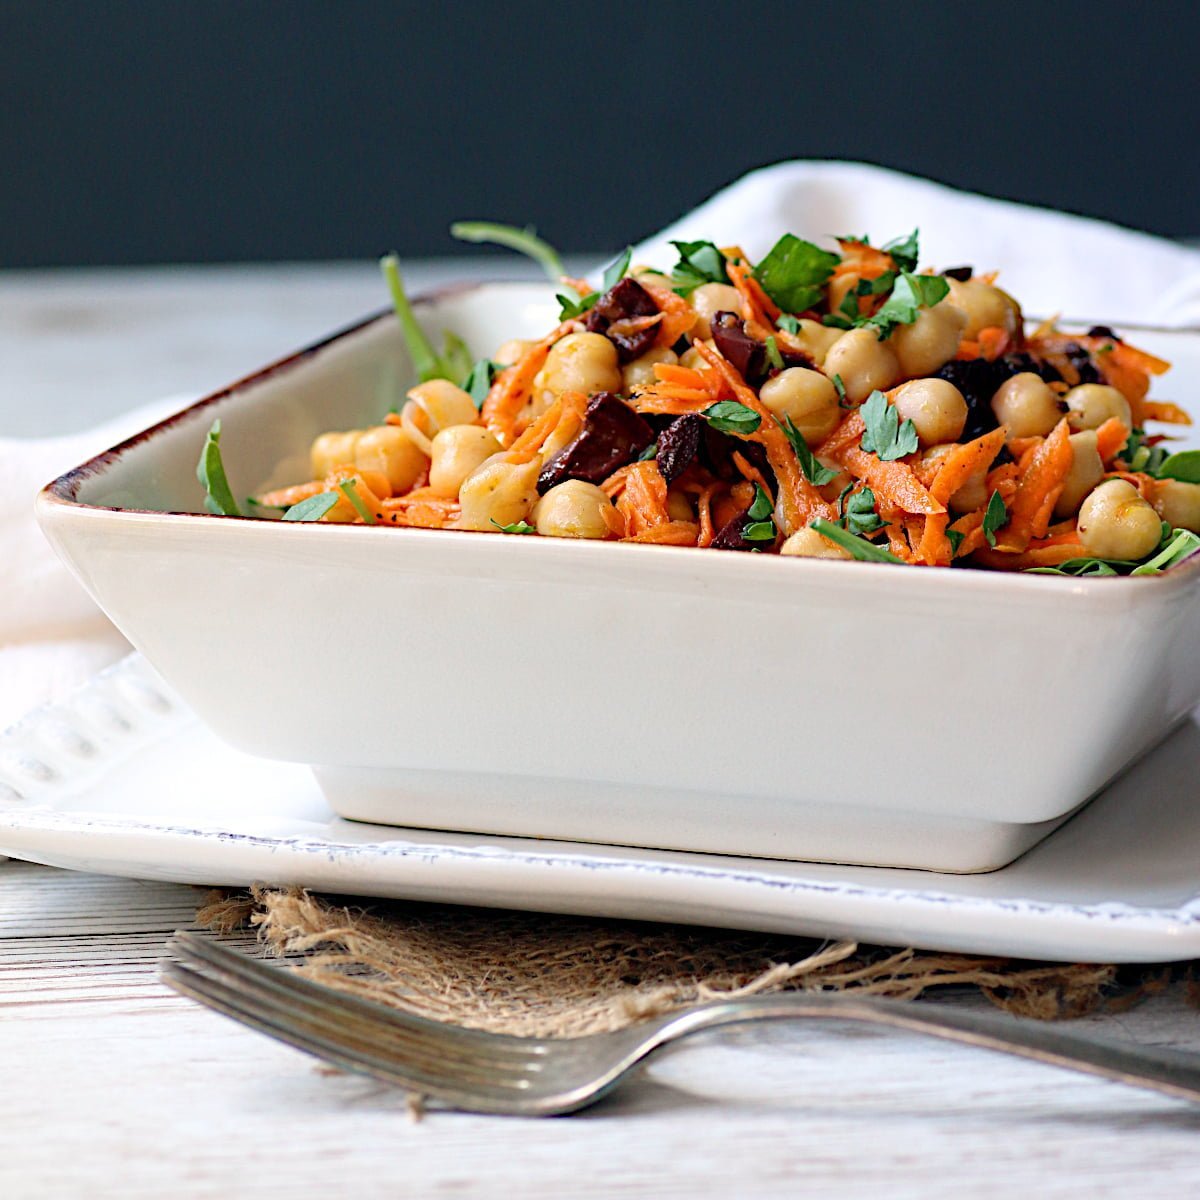 Chickpea salad with carrots and olives in a square, white bowl.